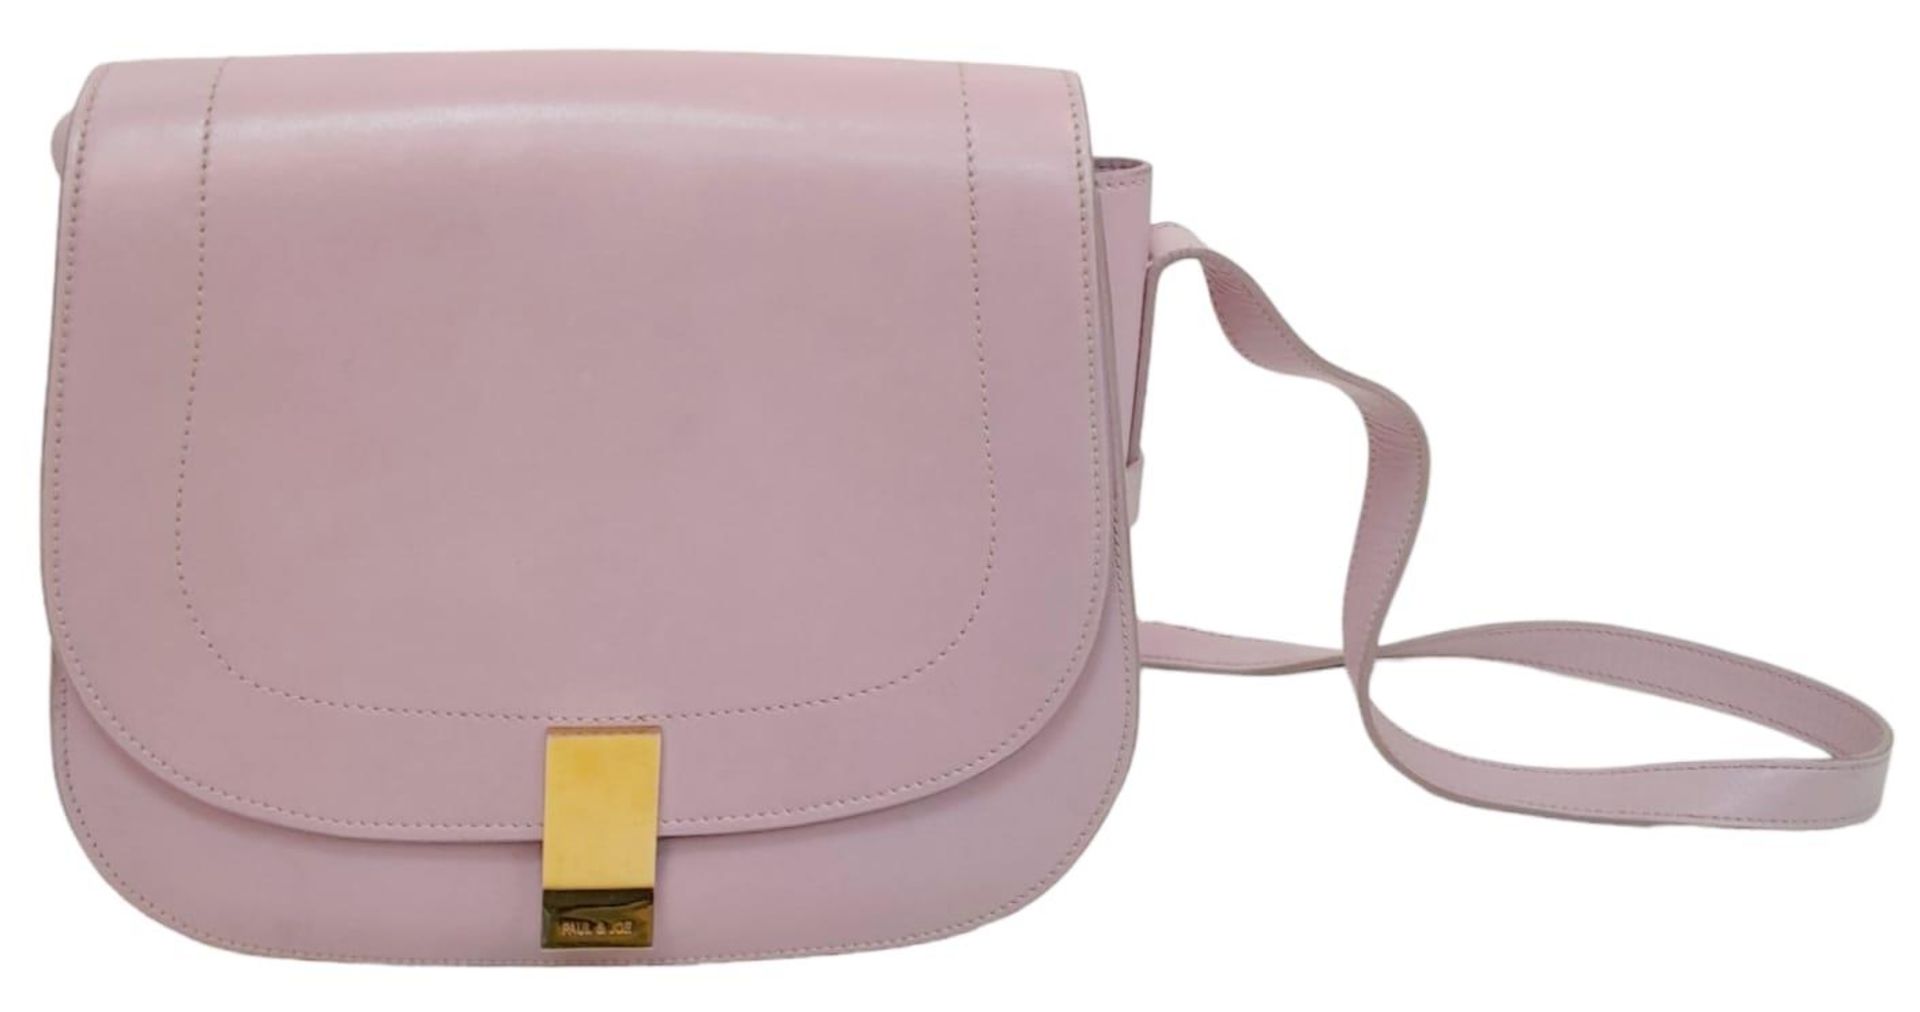 A Paul & Joe Lilac Saddle Bag. Leather exterior with adjustable strap, open compartment on back, and